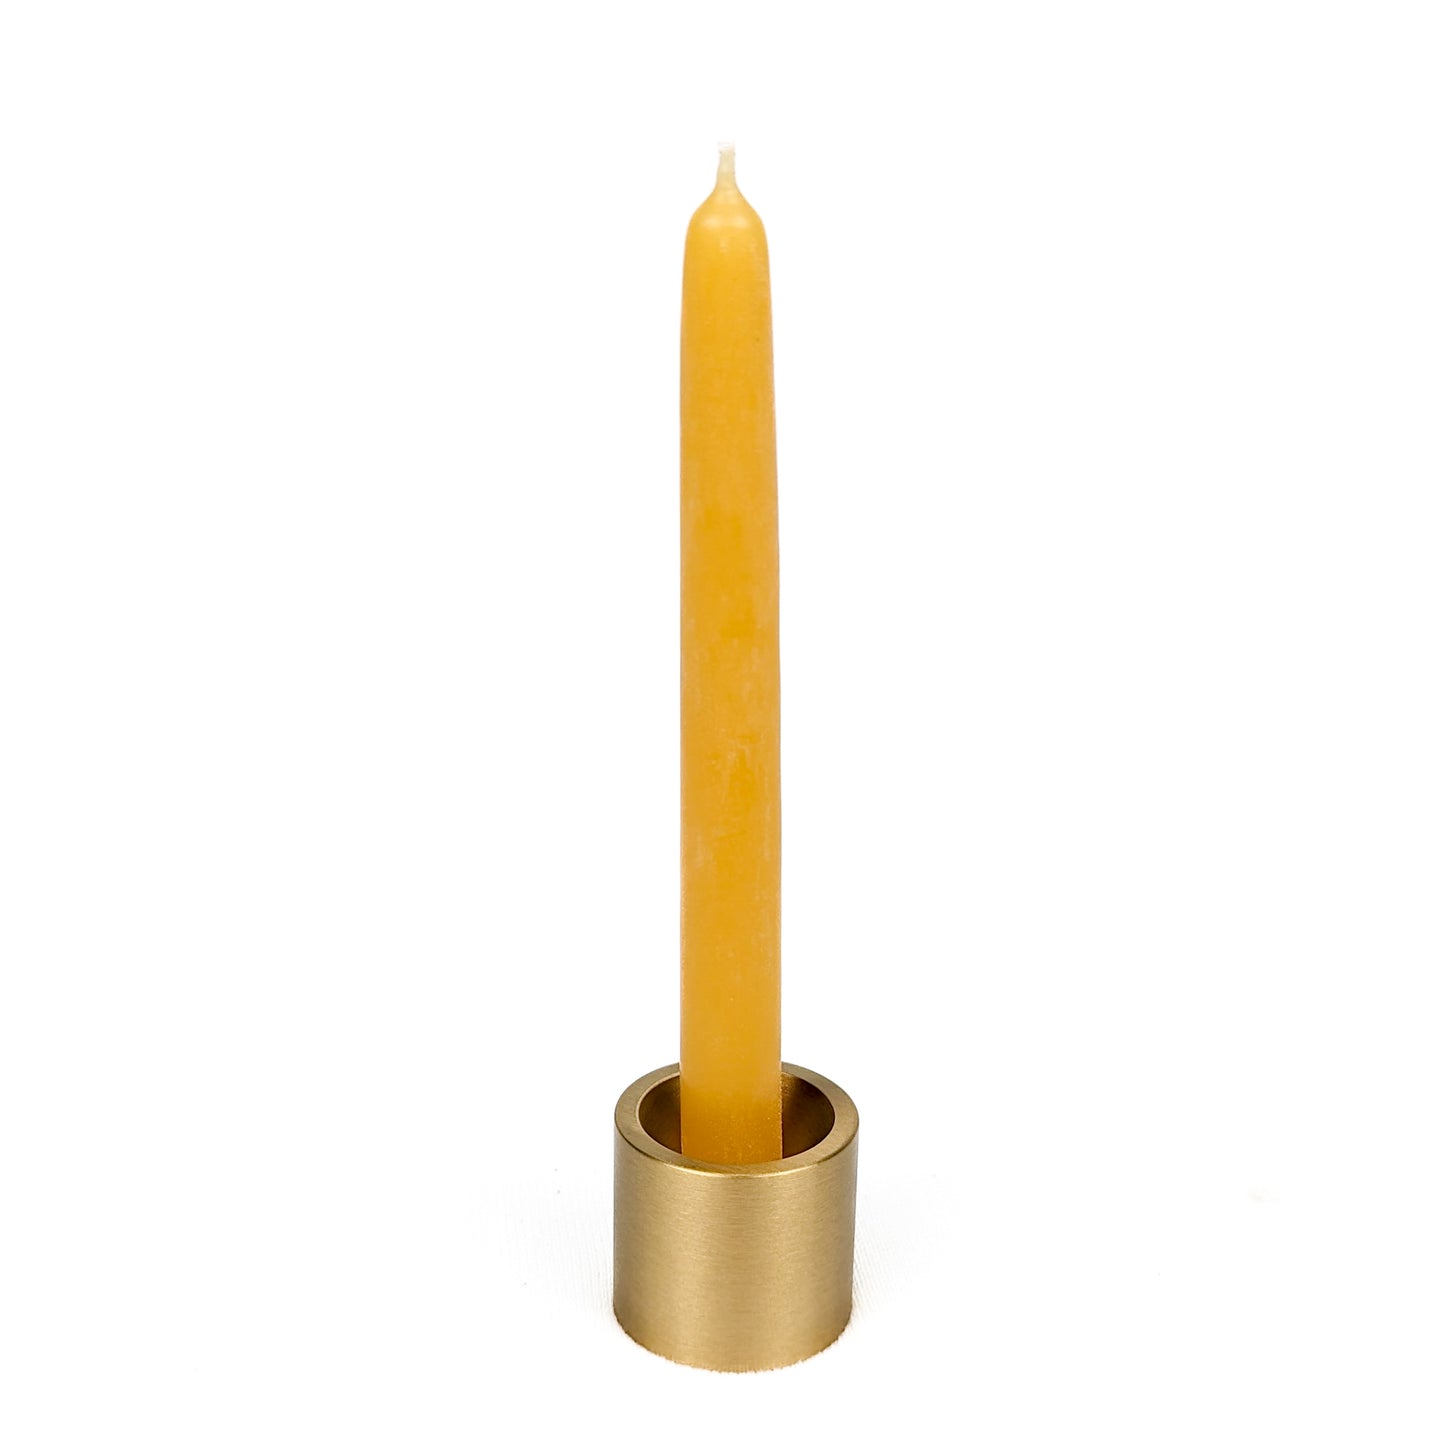 Ceremony Beeswax Candles & Brass Holder Gift Set